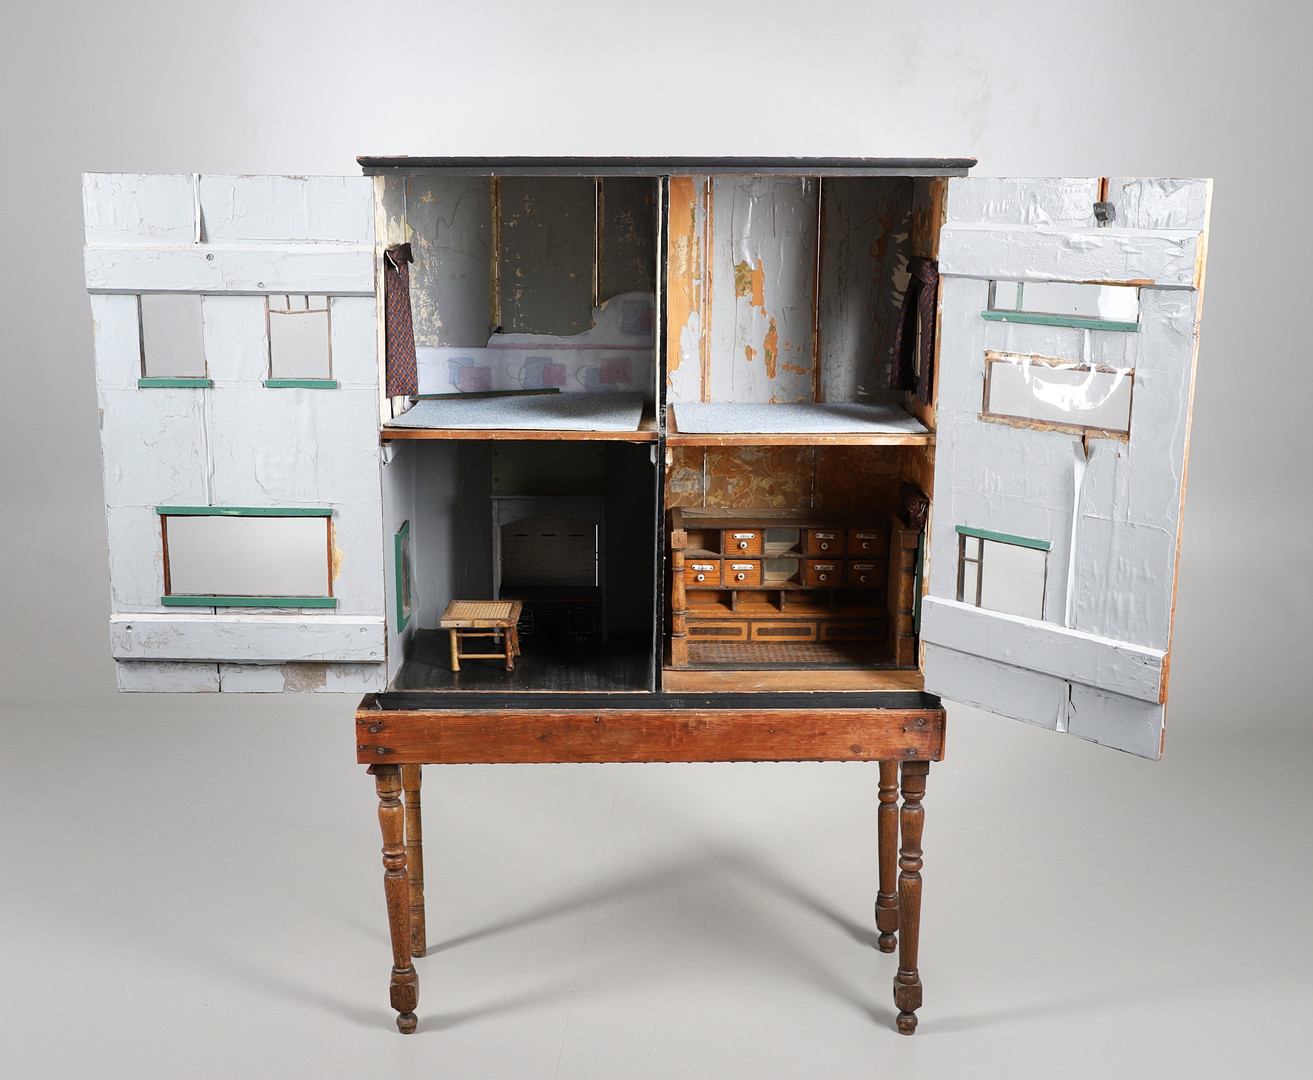 ANTIQUE DOLLS HOUSE & ACCESSORIES - MODELLED AFTER BROUGHTON HALL, STAFFORDSHIRE. - Image 5 of 33